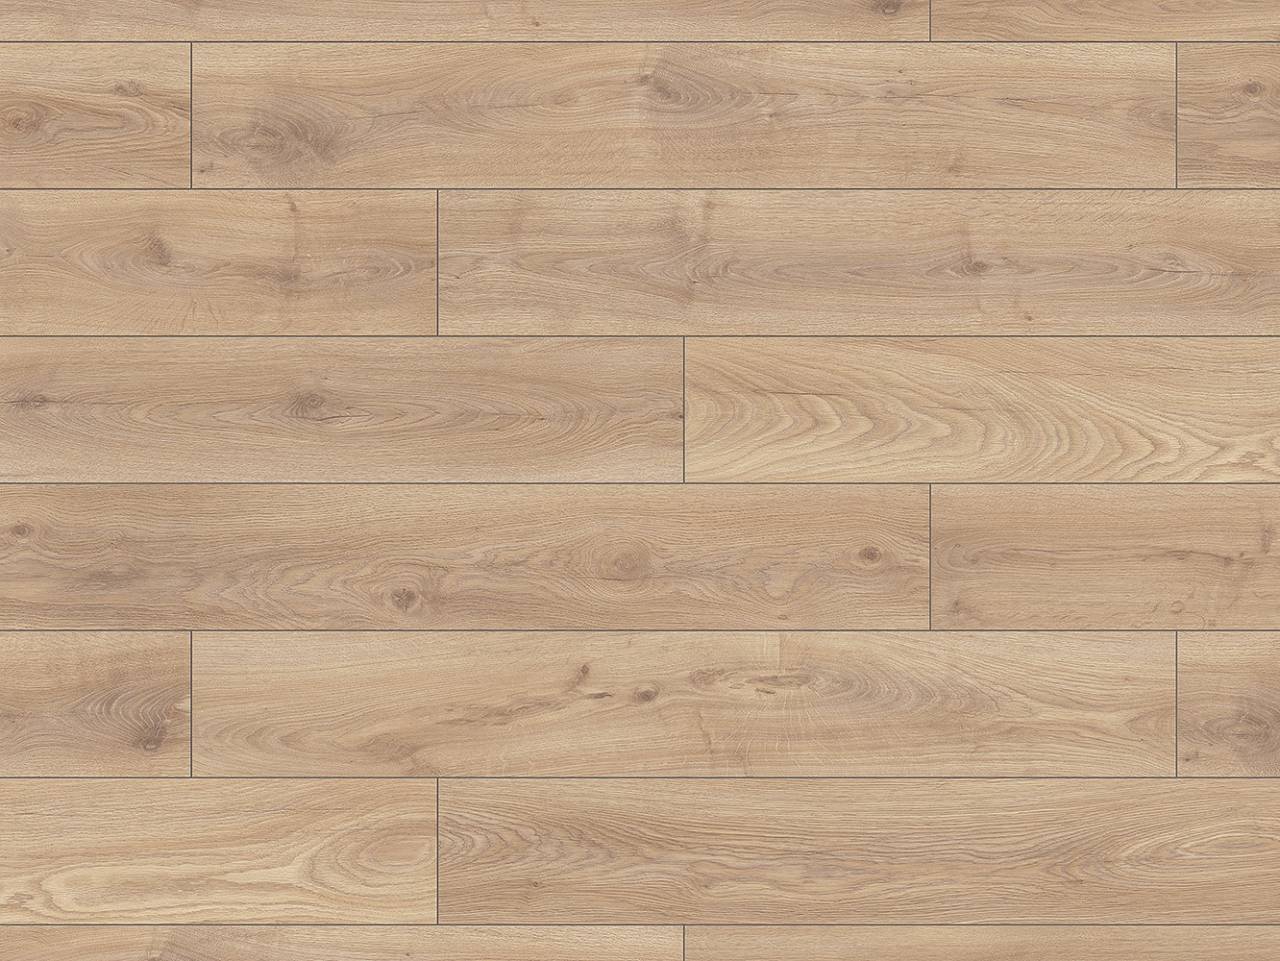 Product K453 Biscotti Oak, featuring a detailed oak grain pattern and a warm, inviting color palette.